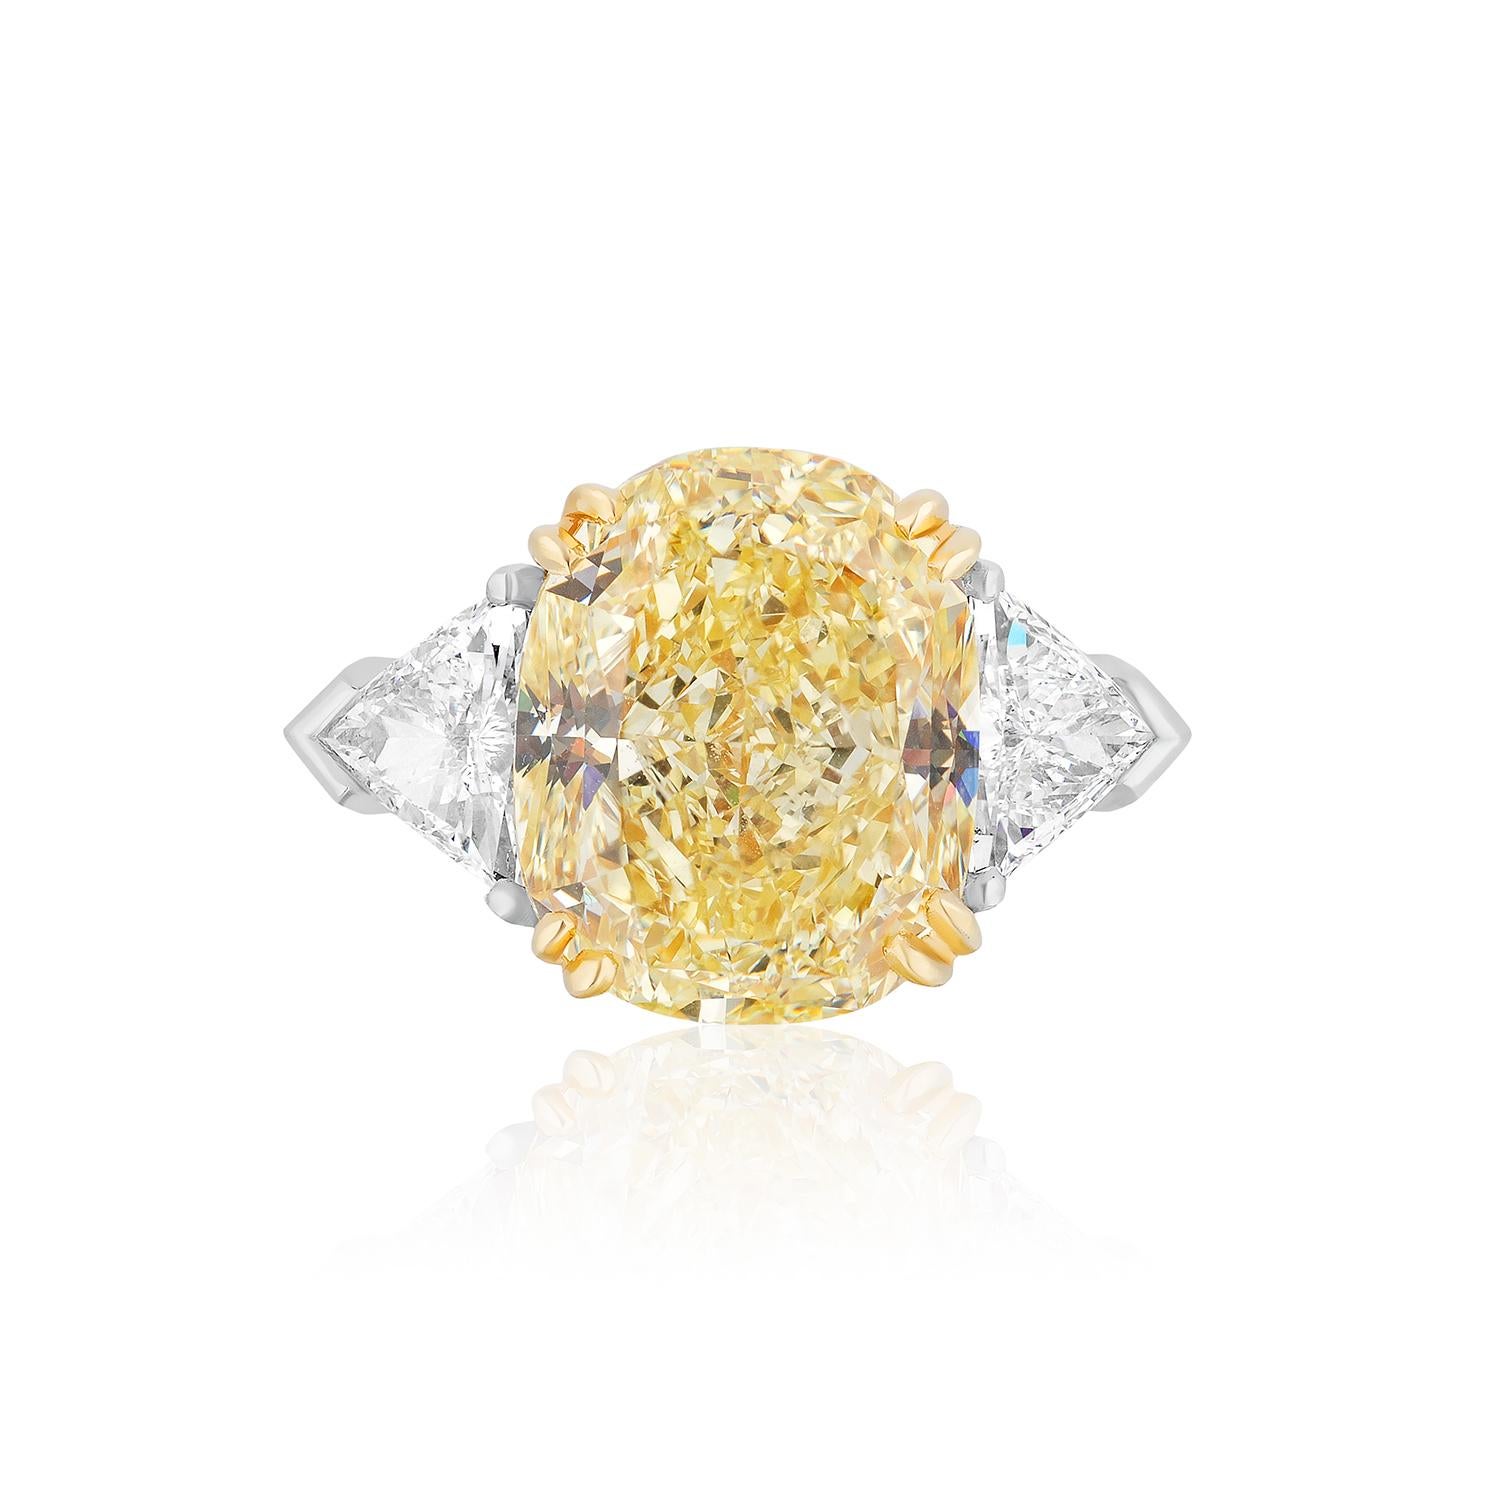 Centered upon a beautiful Fancy Yellow Diamond with a VS1 Clarity. Beautiful and hard to find elongated Cushion flanked by 2 Triangle Diamonds weighing 0.79 Carats.
Set in Platinum and 18 Karat Yellow Gold.